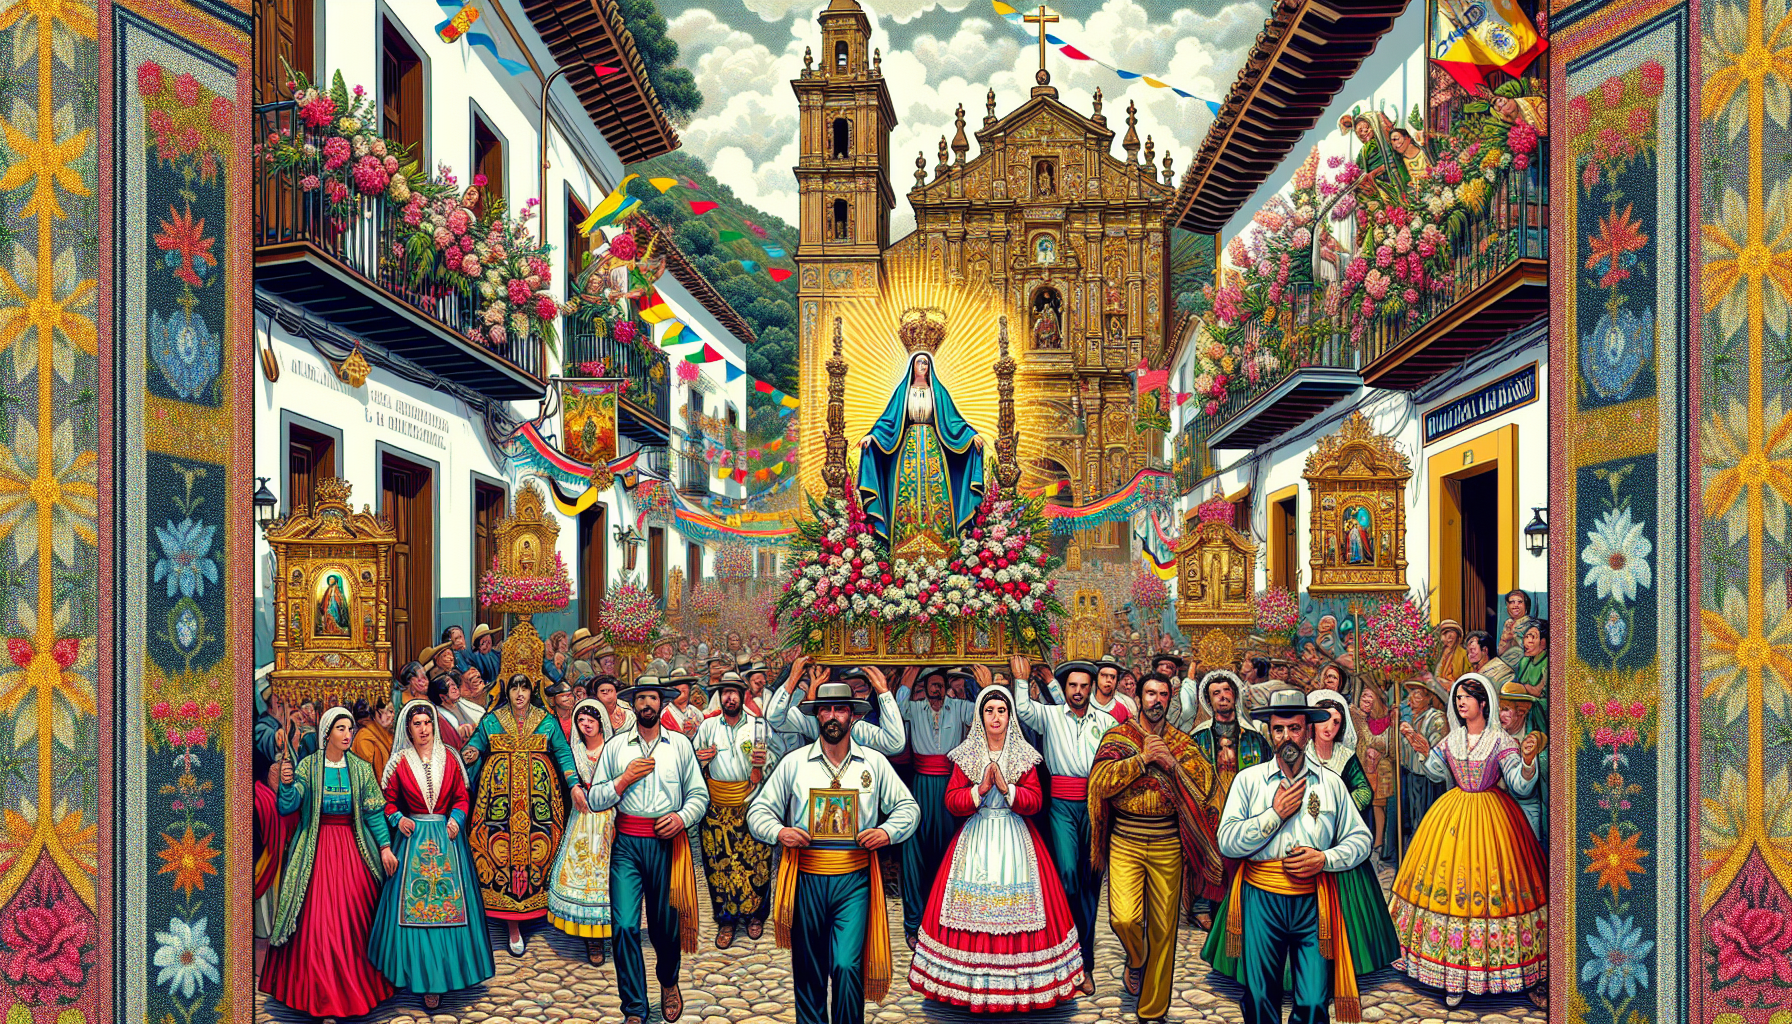 An artistic depiction of a vibrant Spanish village celebrating both the Asunción and Nuestra Señora de los 7 Dolores. The scene shows colorful decorations, with banners and flowers adorning the street